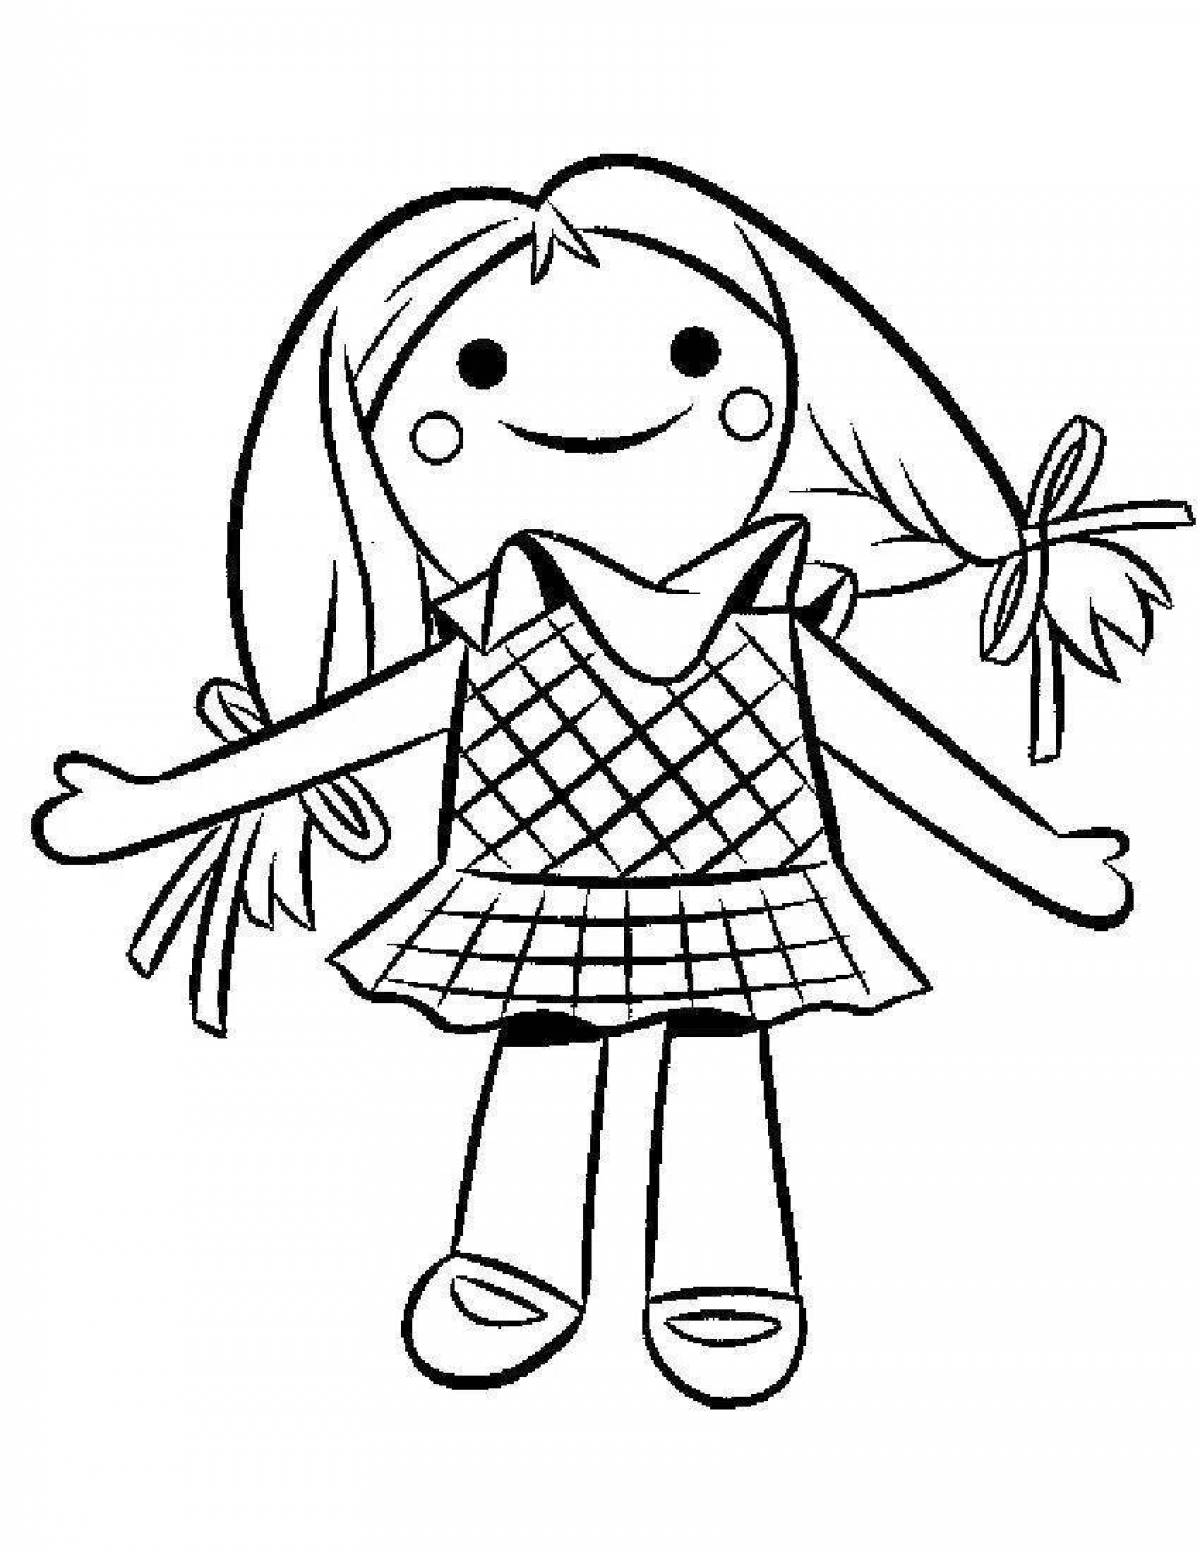 Coloring page nice dolly